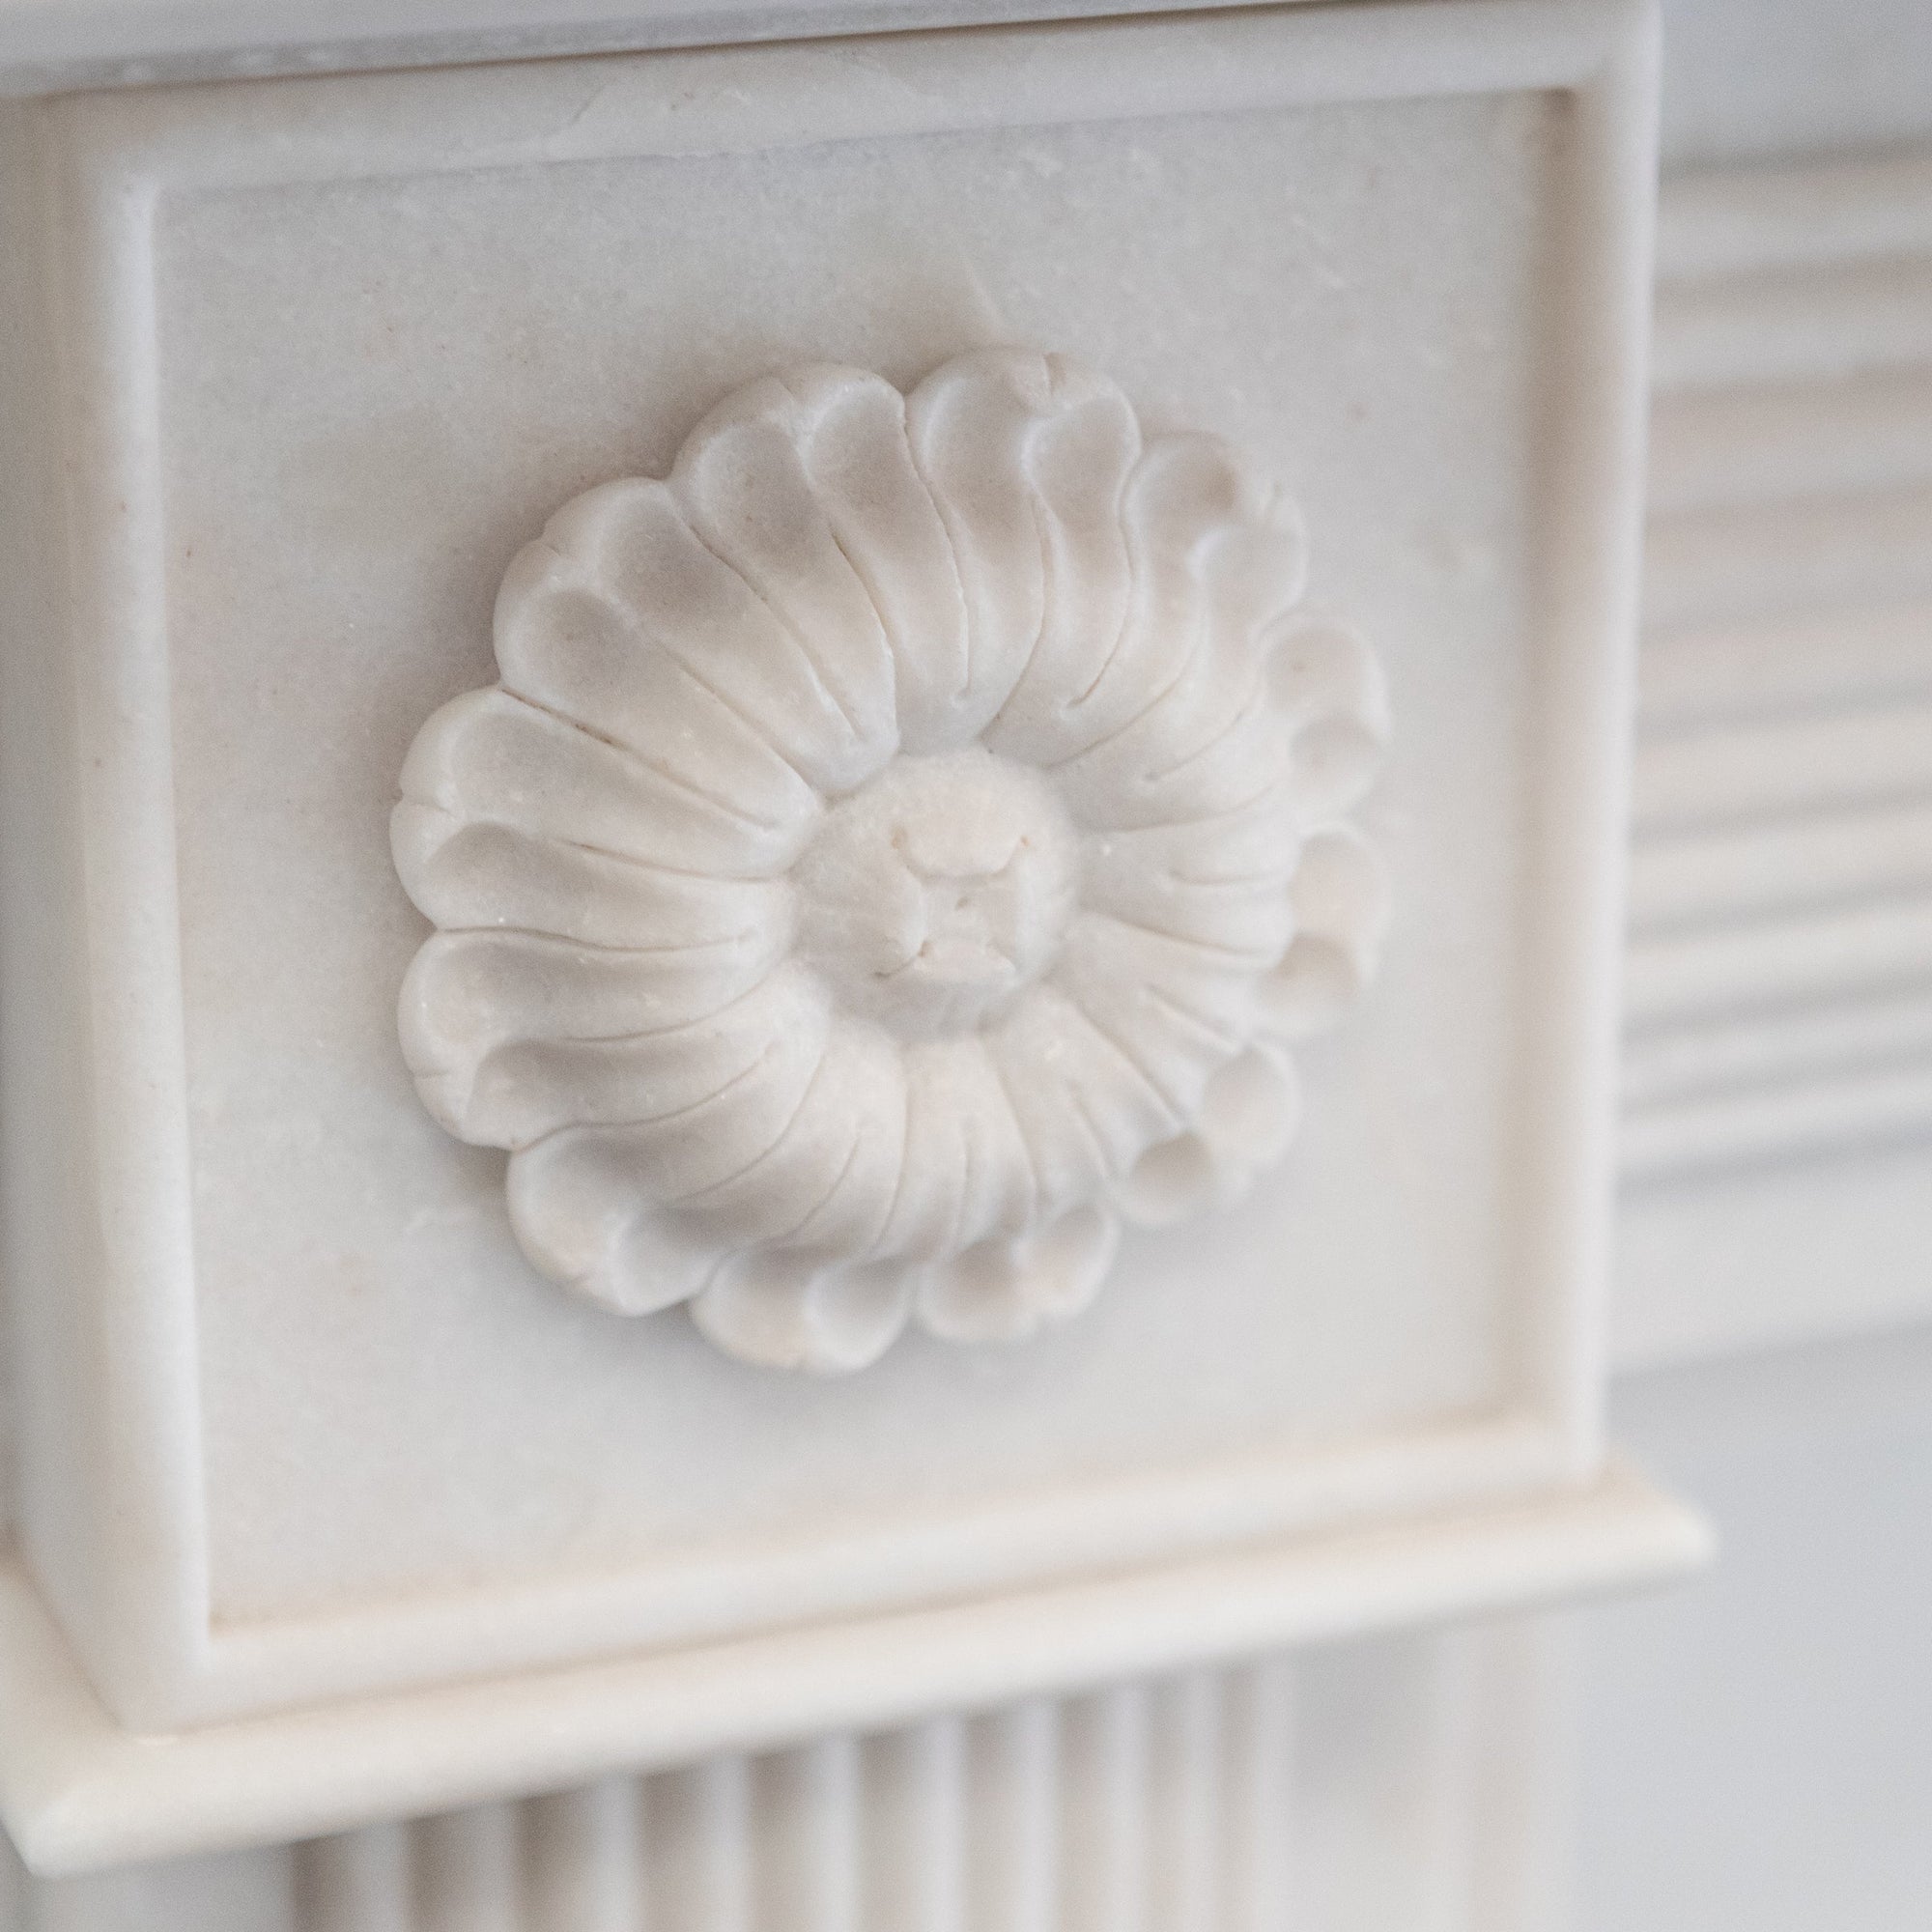 Regency Style Statuary Marble Fireplace Surround | The Architectural Forum